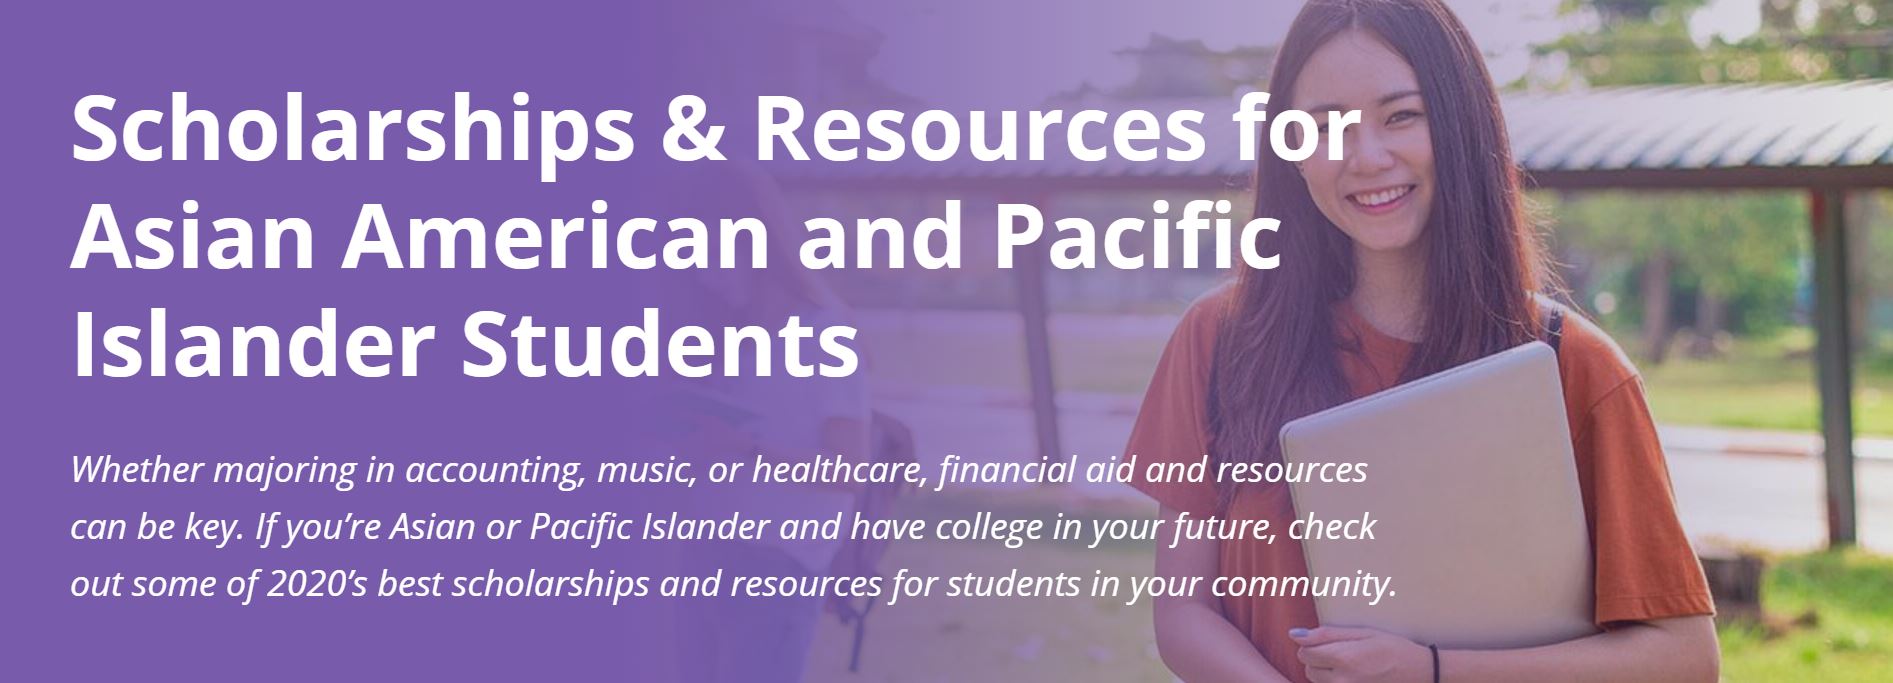 Scholarships & Resources for Asian Americans and Pacific Islanders